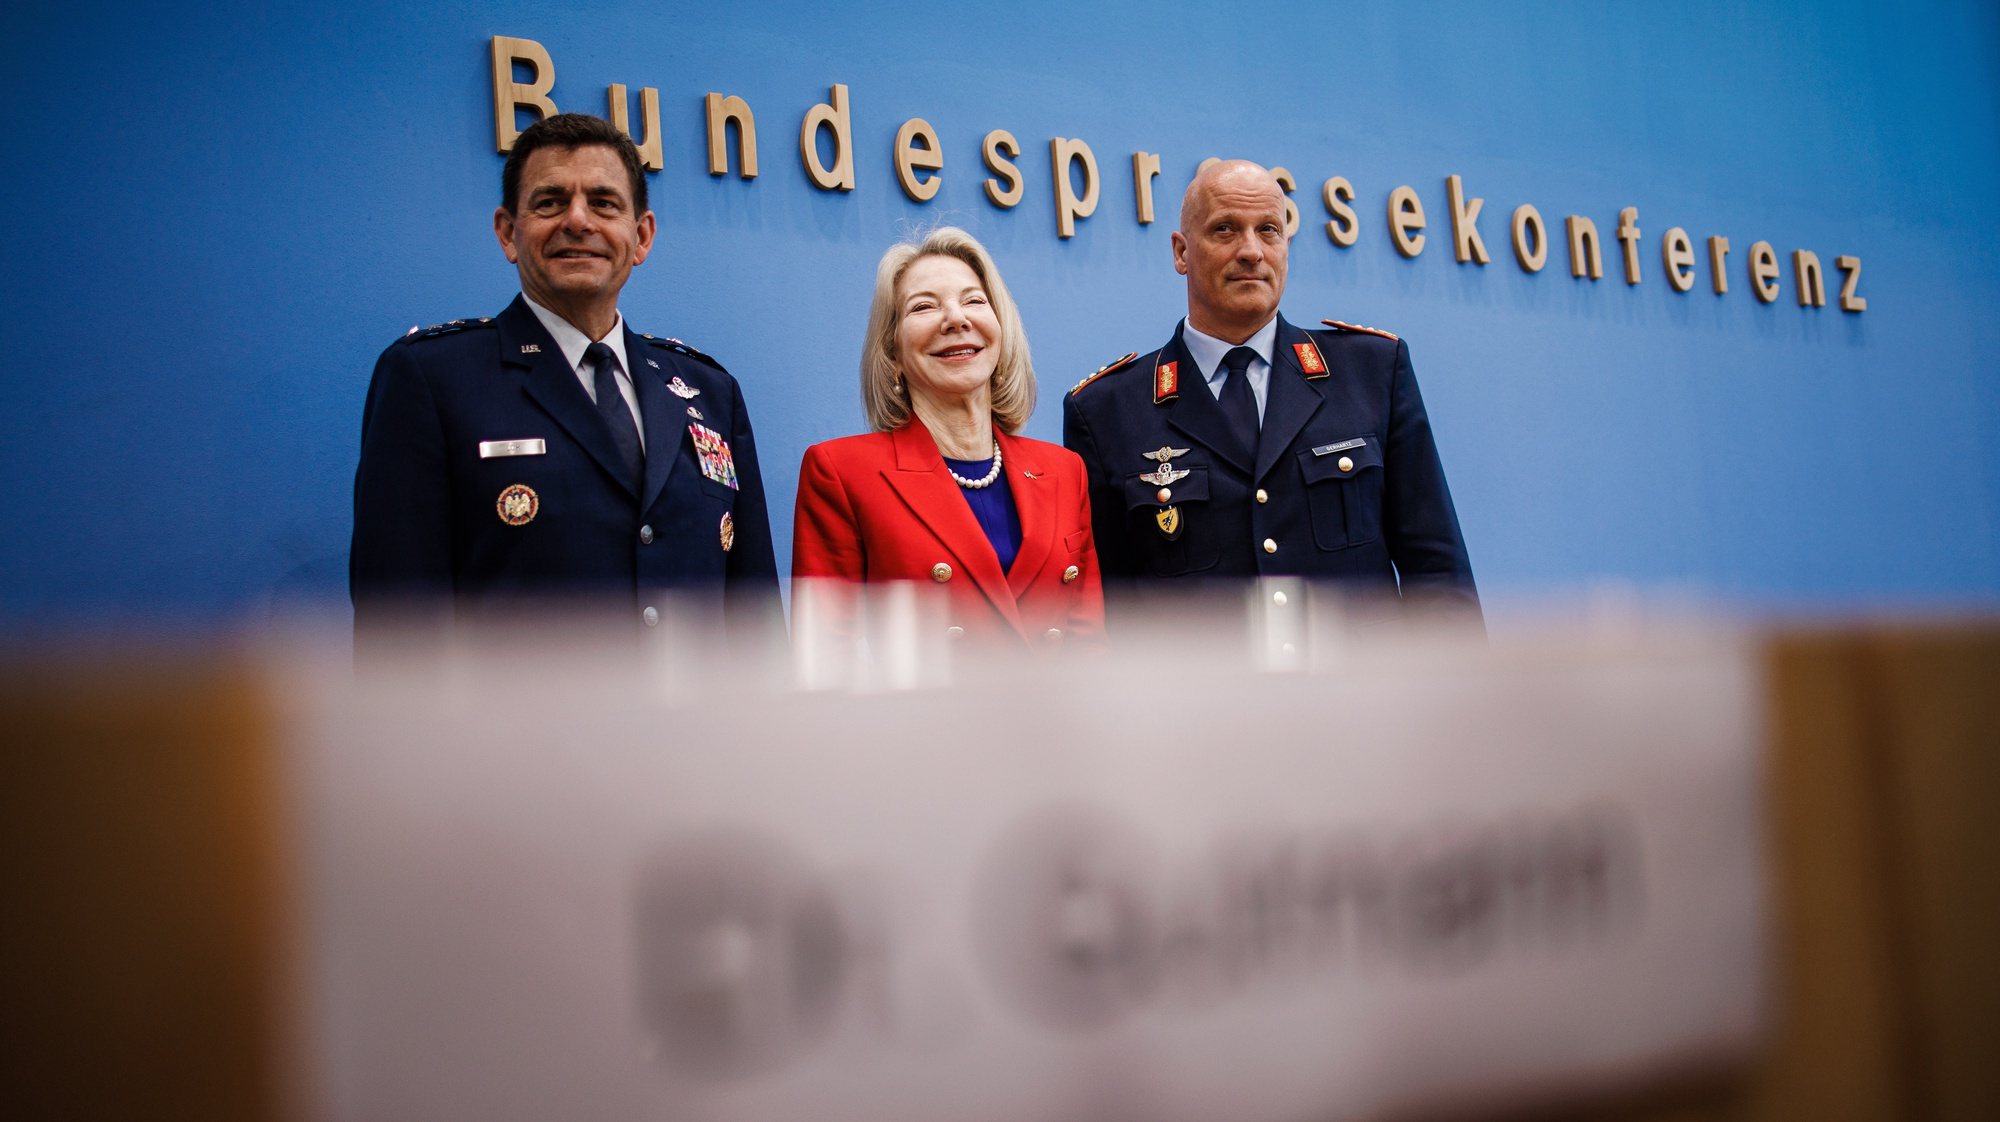 epa10676995 (L-R) Director U.S. Air National Guard Lieutenant General Michael A. Loh, U.S. Ambassador to Germany Amy Gutmann and Chief of Staff of the German Air Force Lieutenant General Ingo Gerhartz pose for the media at the beginning of a press conference on the NATO Air Defender 2023 exercise at the house of the Federal Press Conference (Bundespressekonferenz) in Berlin, Germany, 07 June 2023. The &#039;Air Defender 2023&#039; maneuver is the largest North Atlantic Treaty Organization (NATO) redeployment exercise of air forces in its existence and takes place from 12 to 23 June with up to 10,000 participants from 25 nations with 250 aircraft to train air operations in European airspace under the command of the German Air Force.  EPA/CLEMENS BILAN